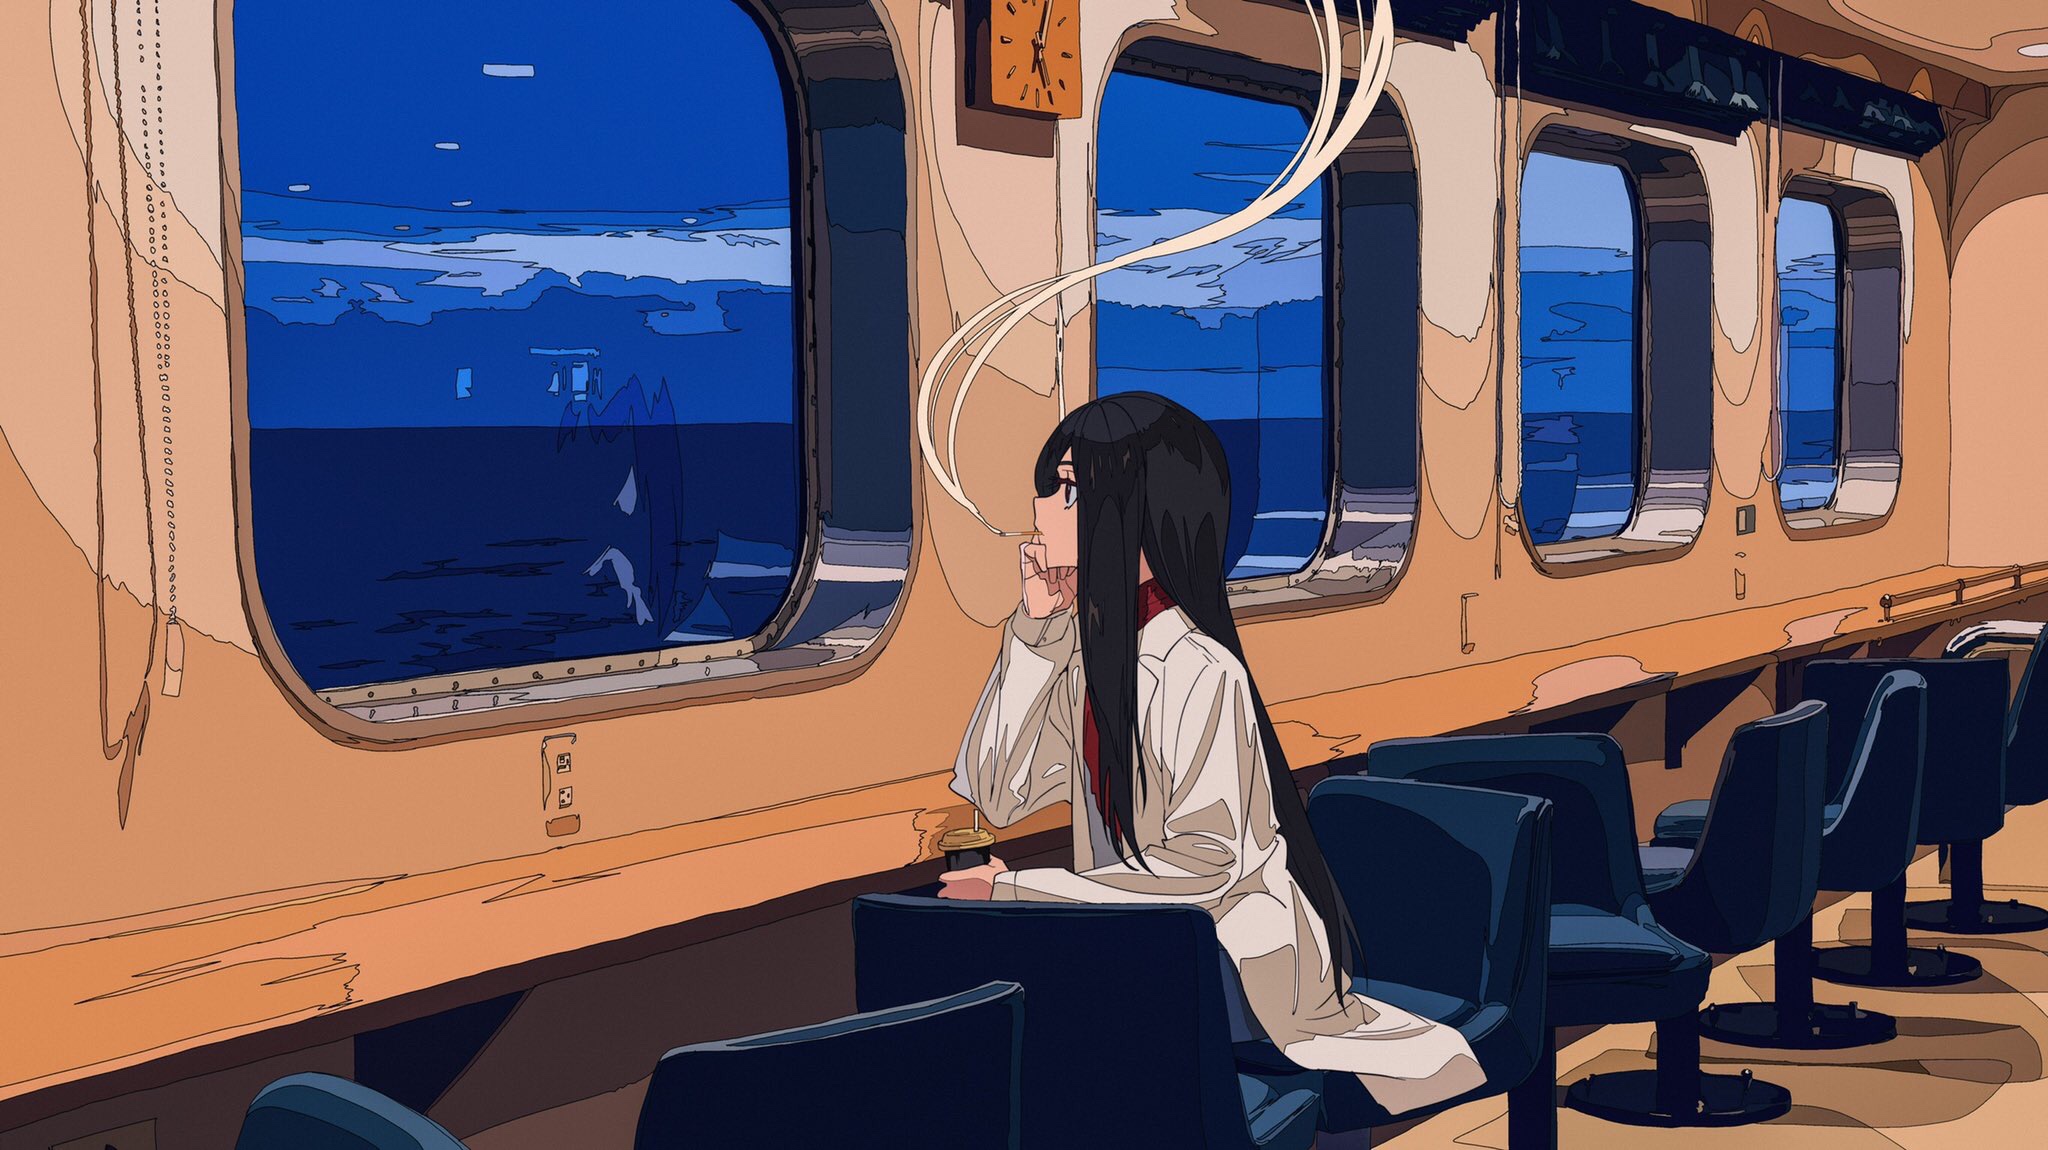 On The Train